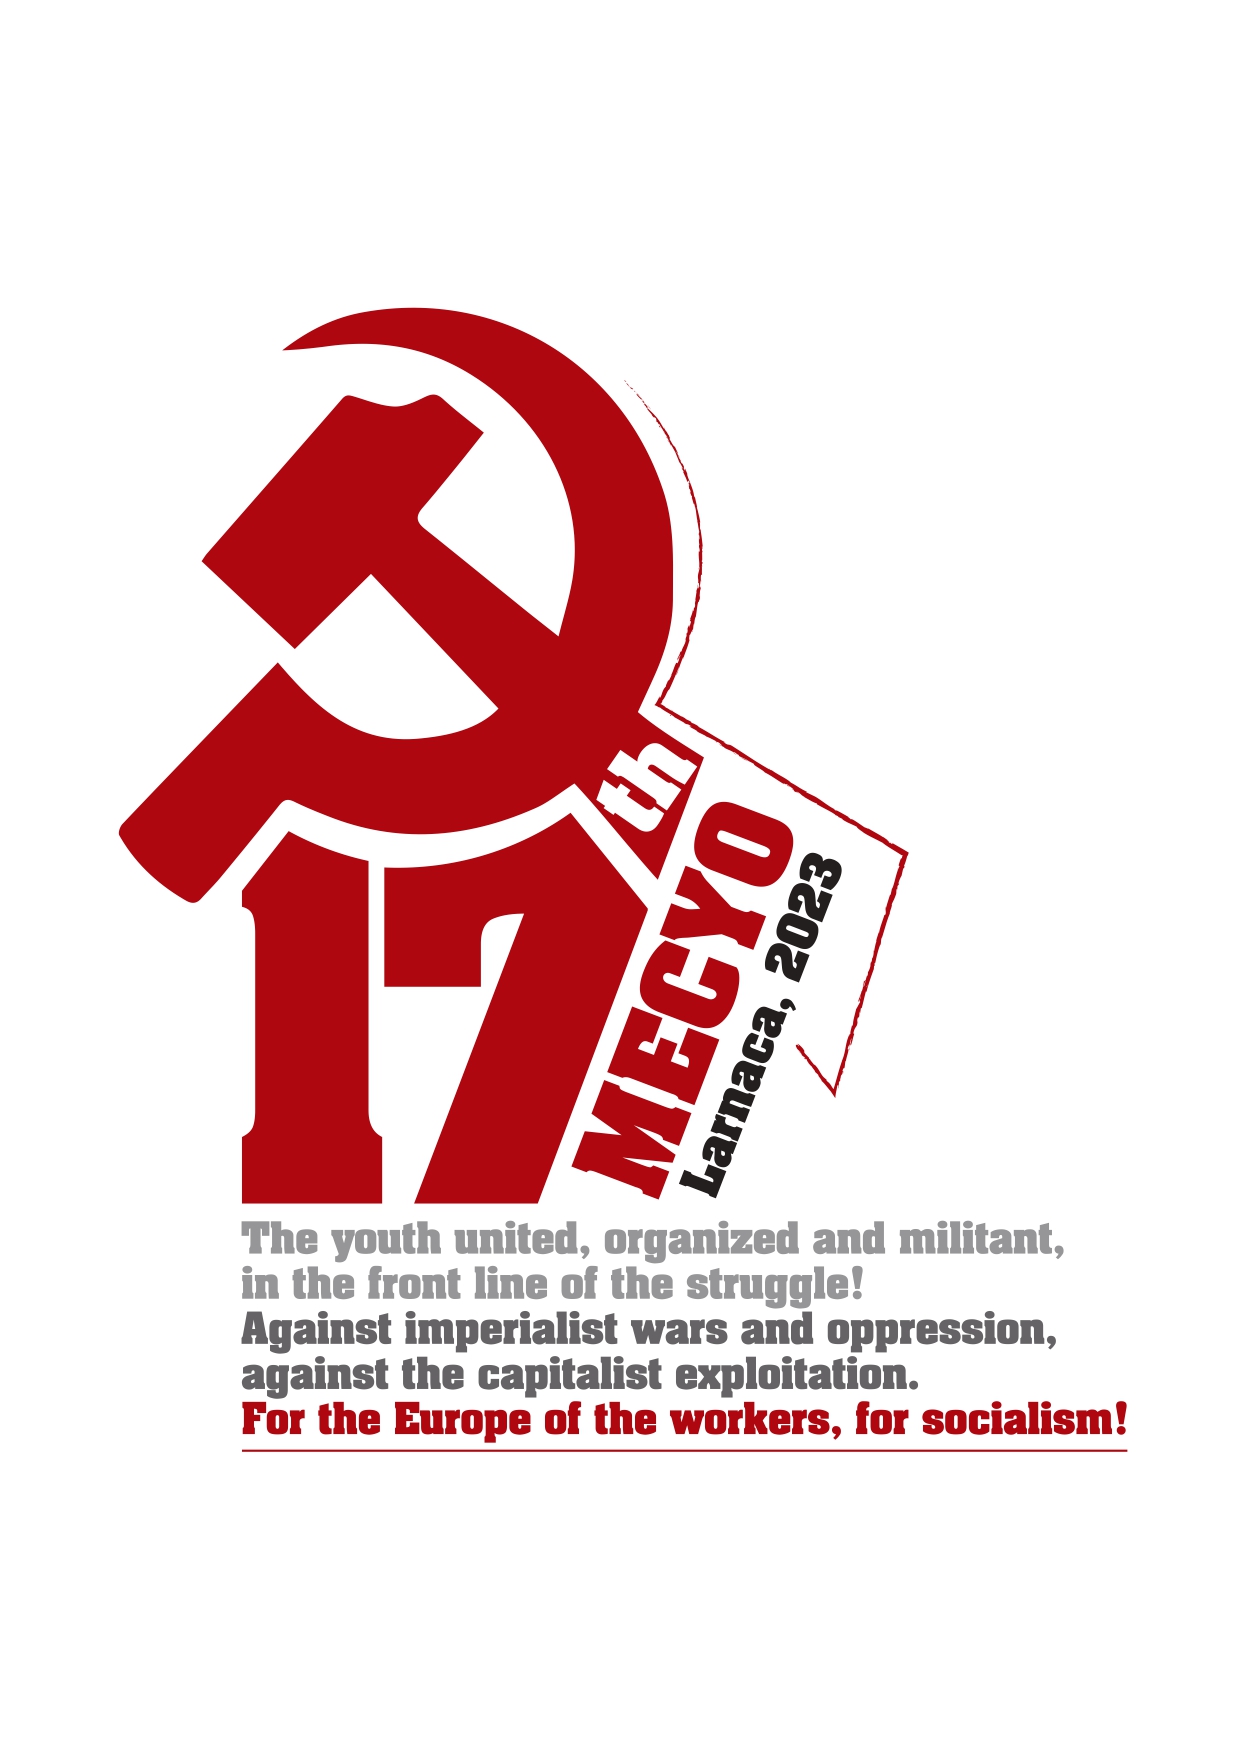 Statement after the 17th Meeting of European Communist Youth Organizations